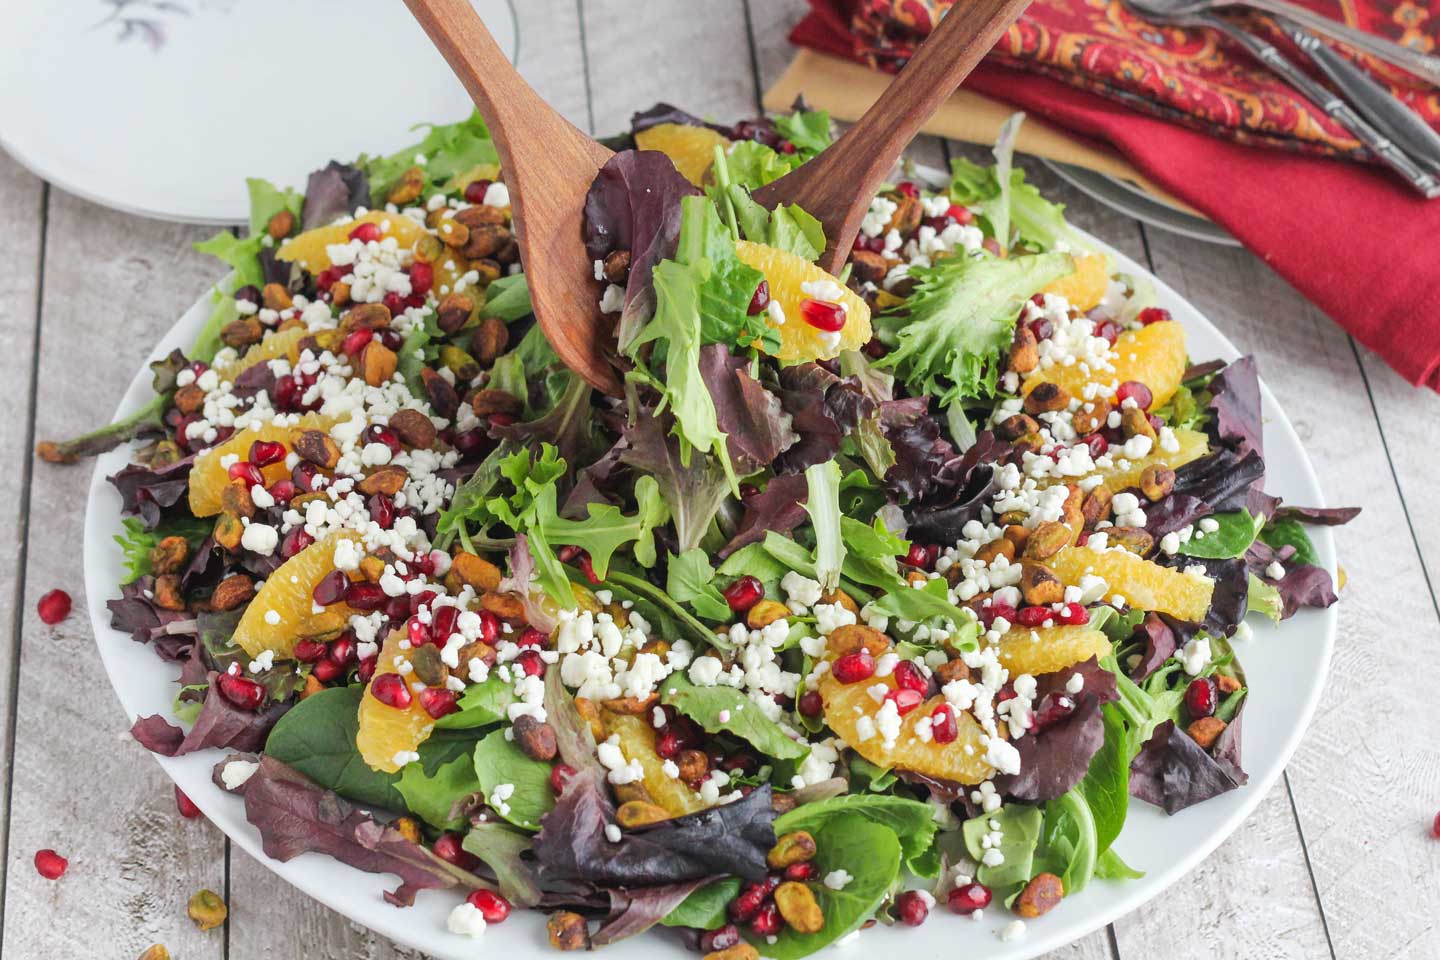 Our easy, beautiful Christmas Salad is so delicious, all loaded up with pistachios, pomegranate, oranges and goat cheese with a light citrus-champagne vinaigrette!